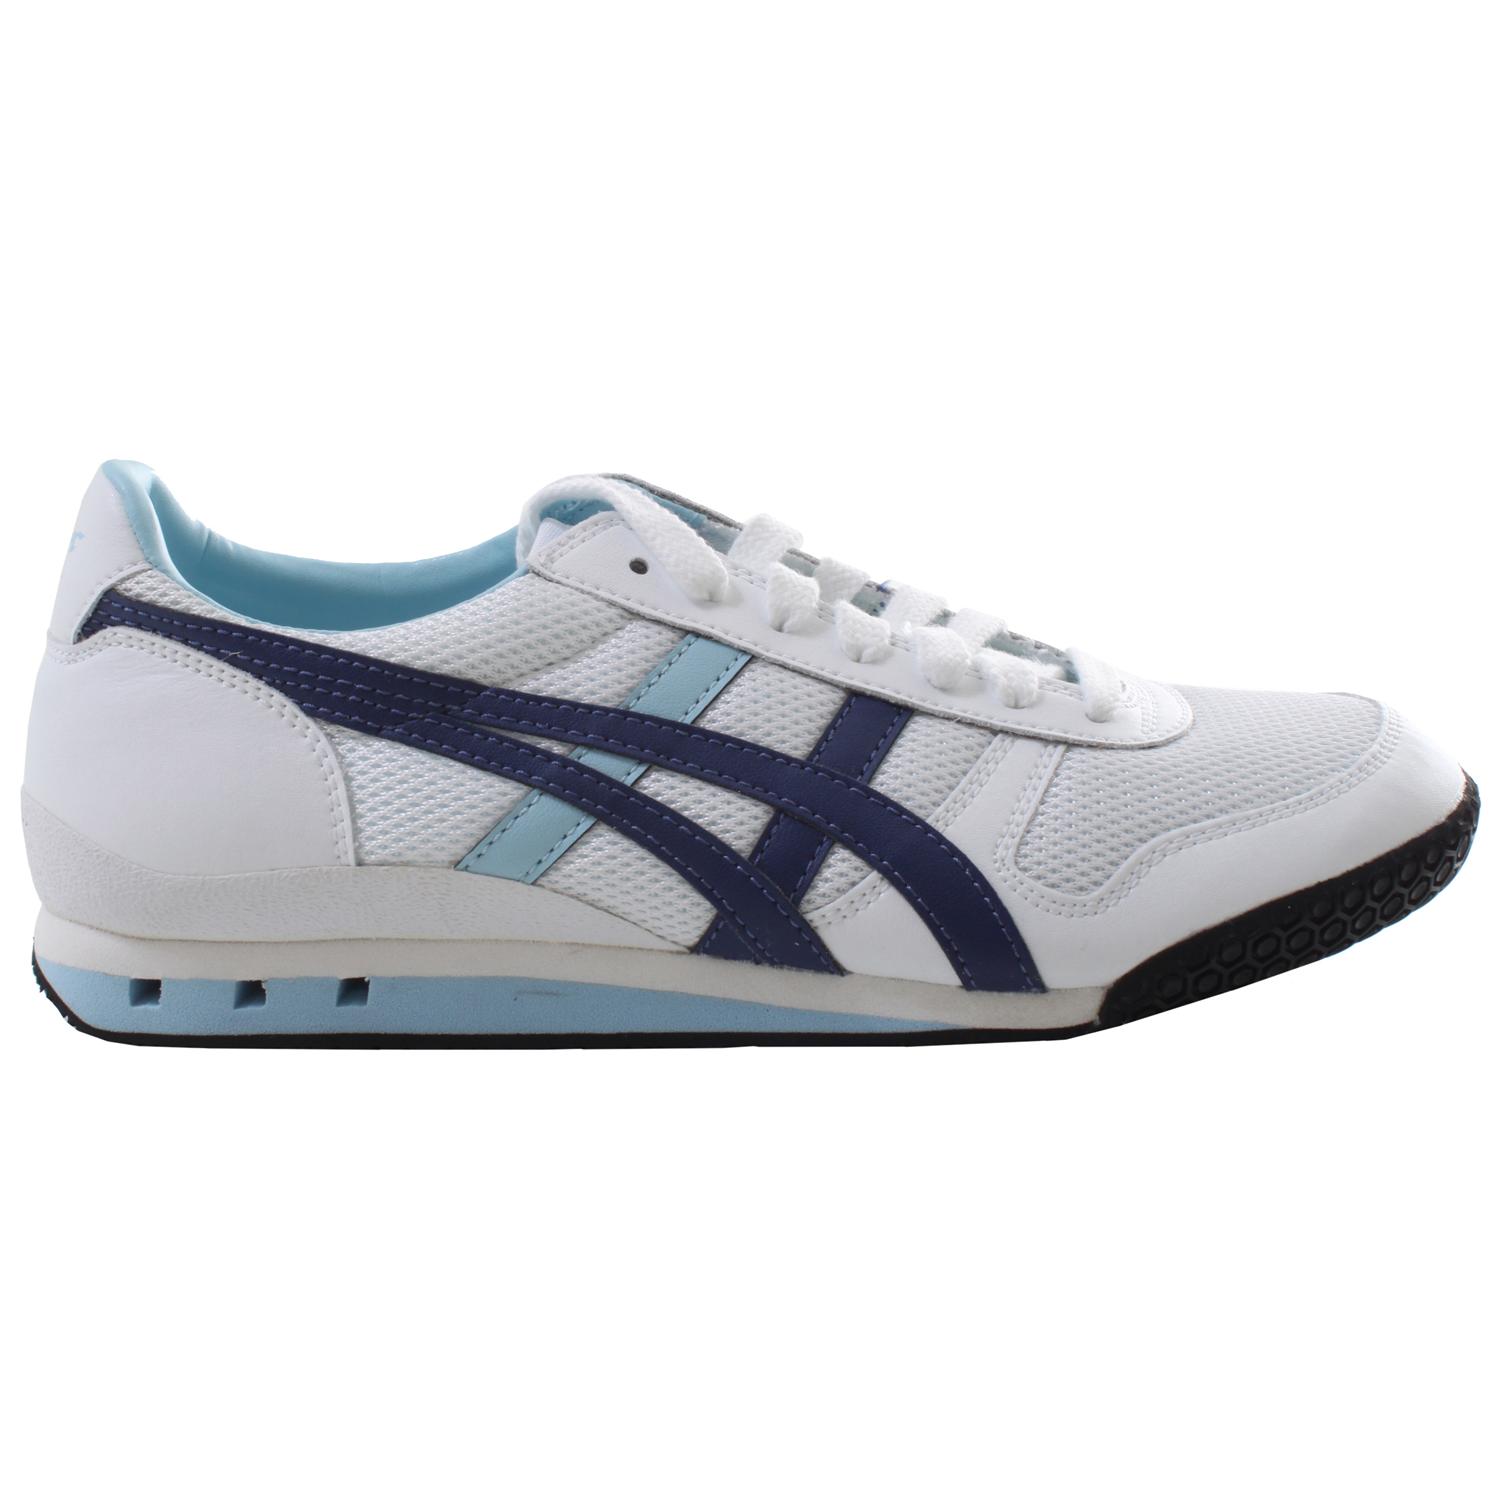 Onitsuka Tiger Ultimate 81 Shoes - Women's | evo